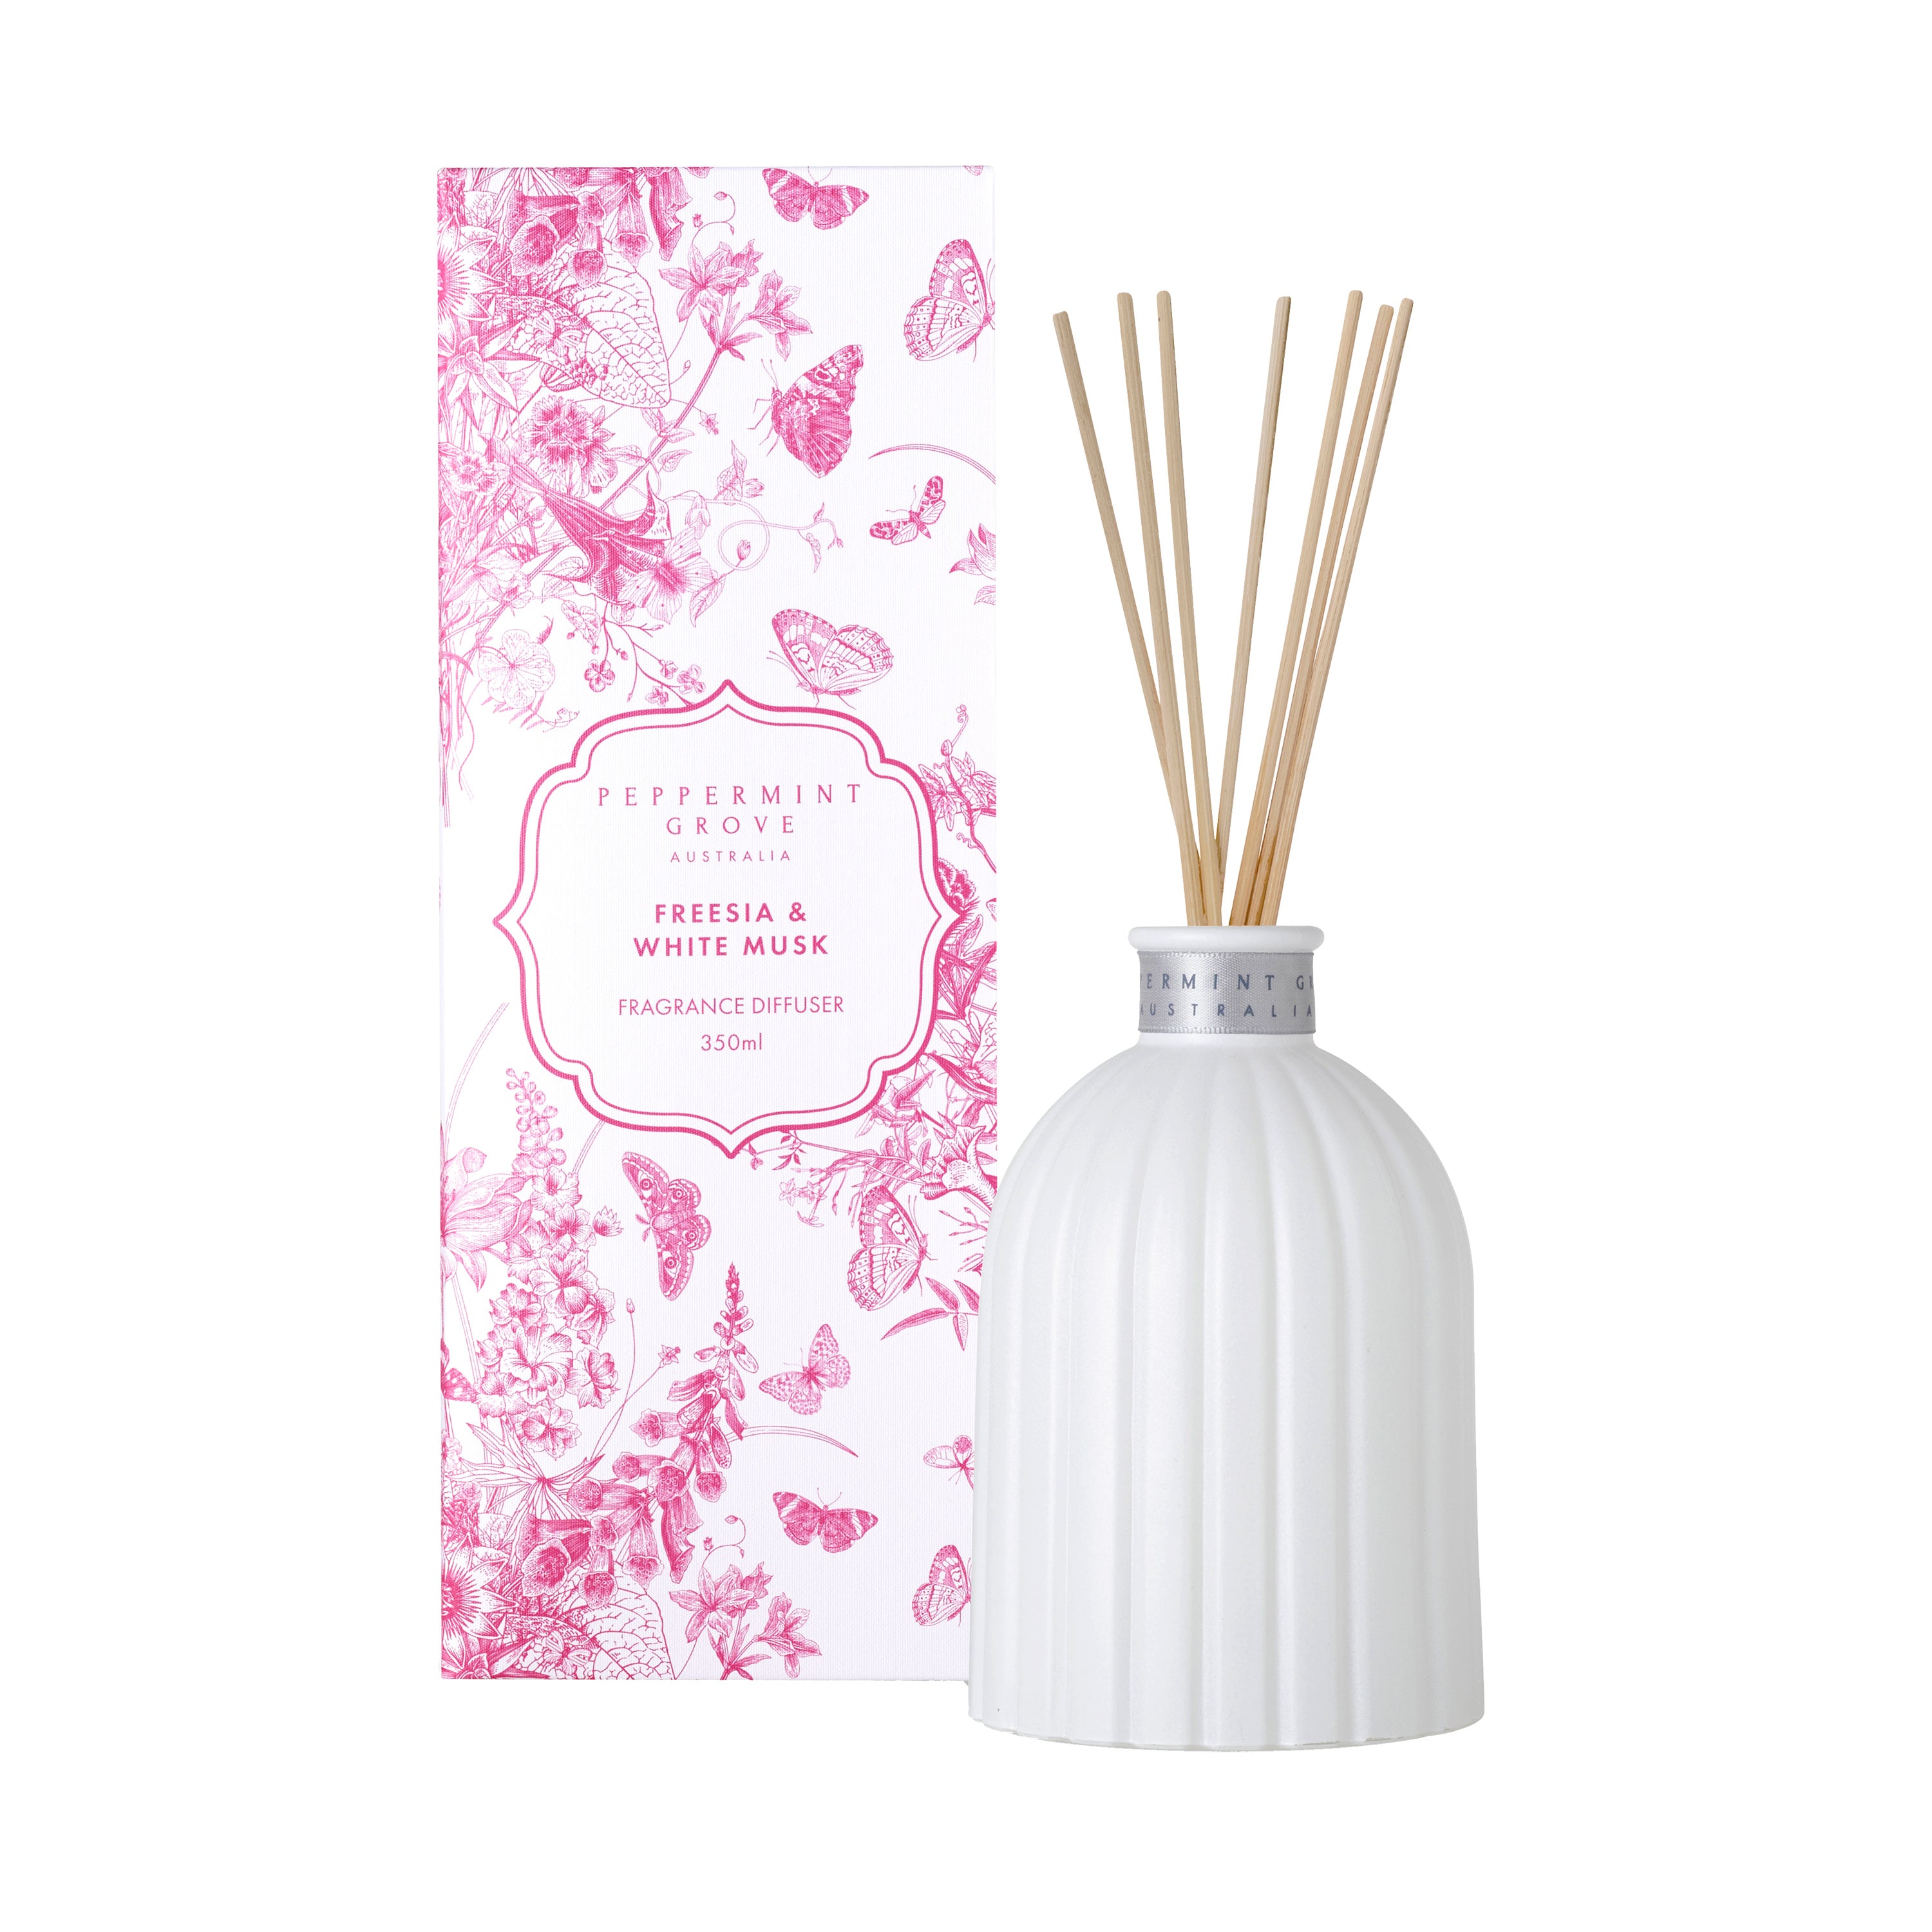 Peppermint Grove Freesia & White Musk Fragrance Diffuser 350ml (Limited Edition)